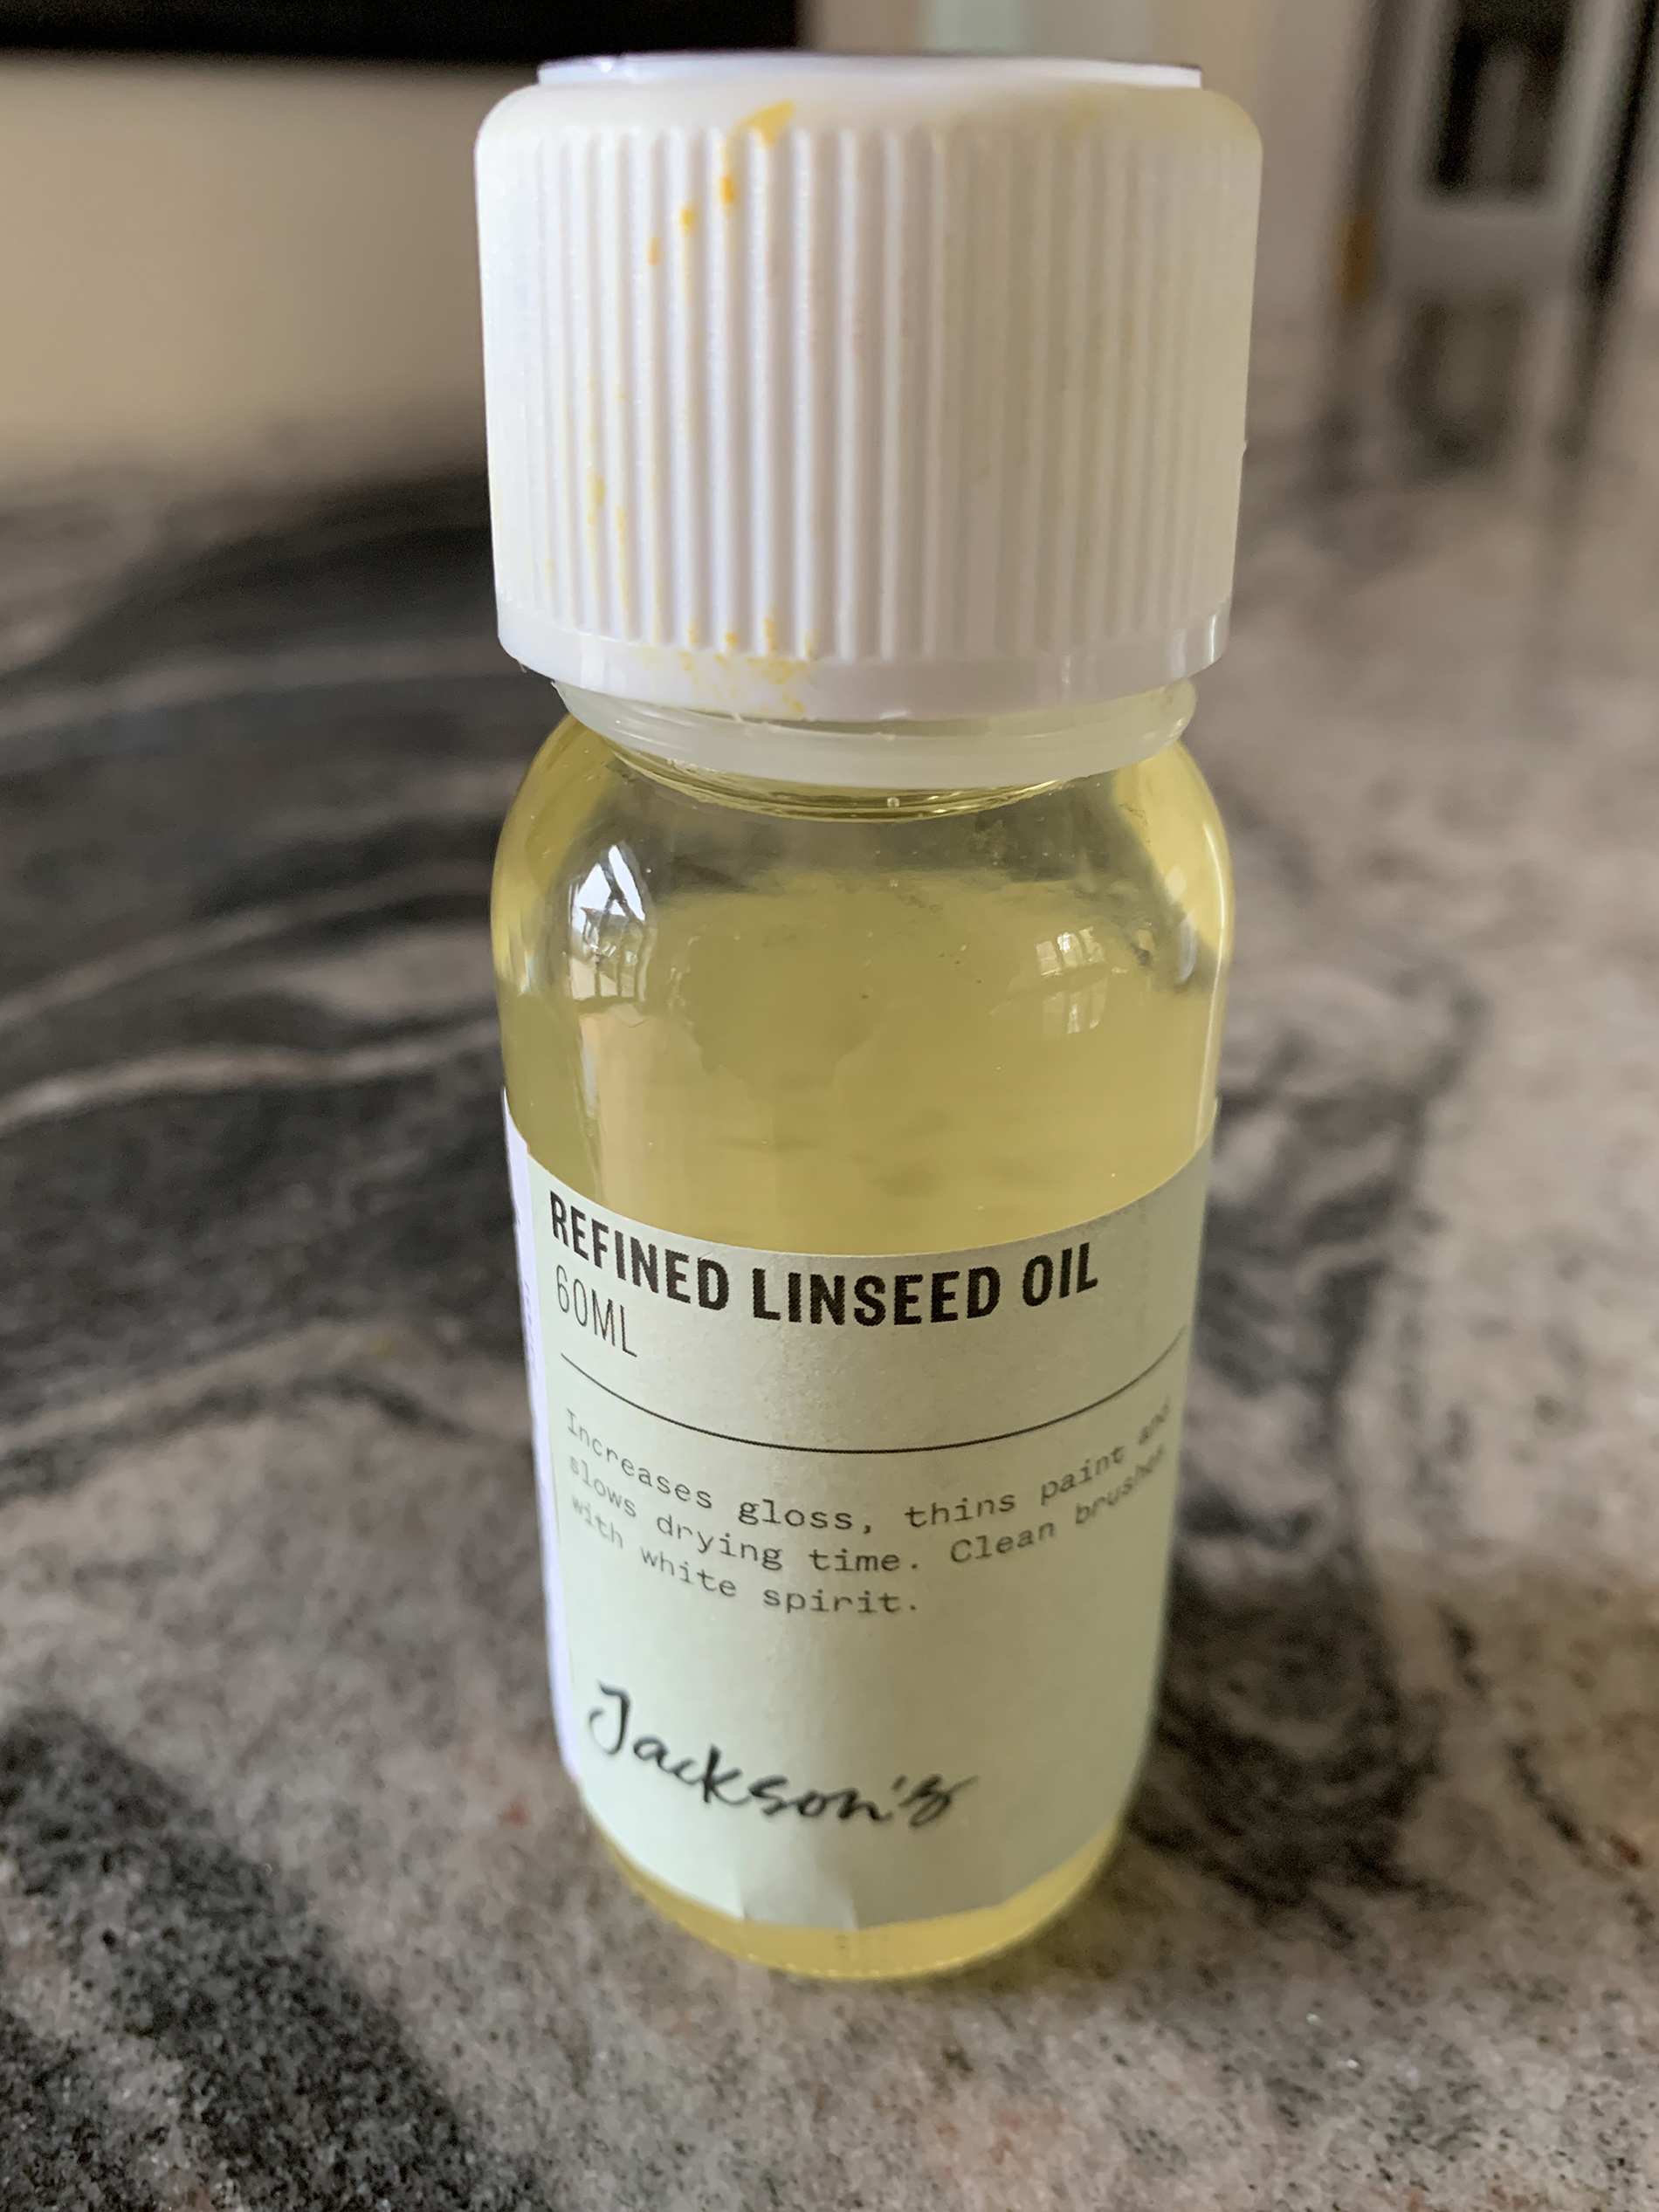 Jackson's Refined Linseed Oil